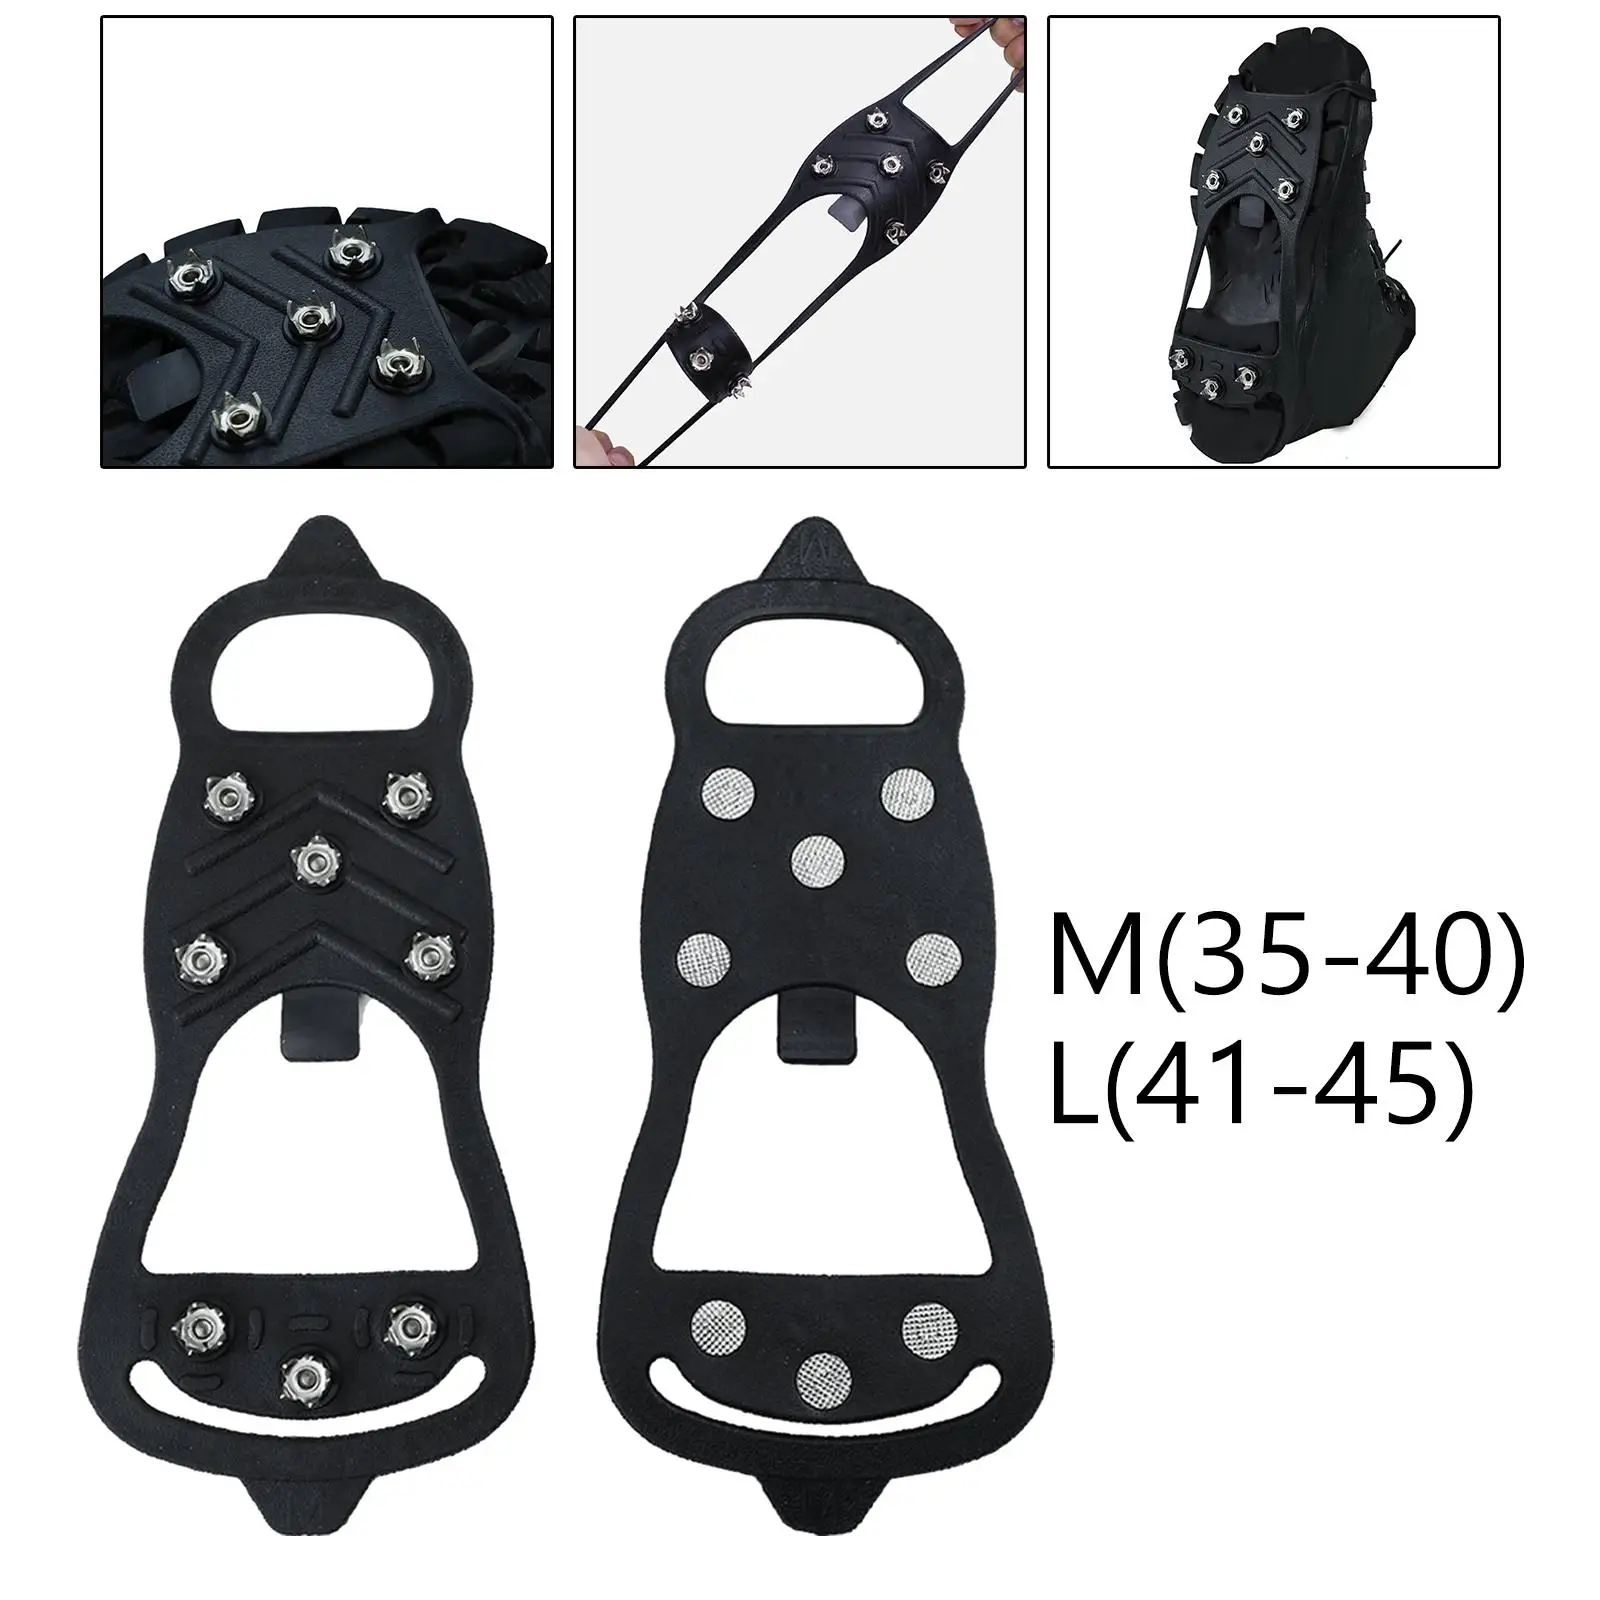 1 Pair 8 Spikes Crampons Non Slip Traction Crampon Spikes Grips for Walking on Snow and Ice Winter Mountain Roads Mountaineering